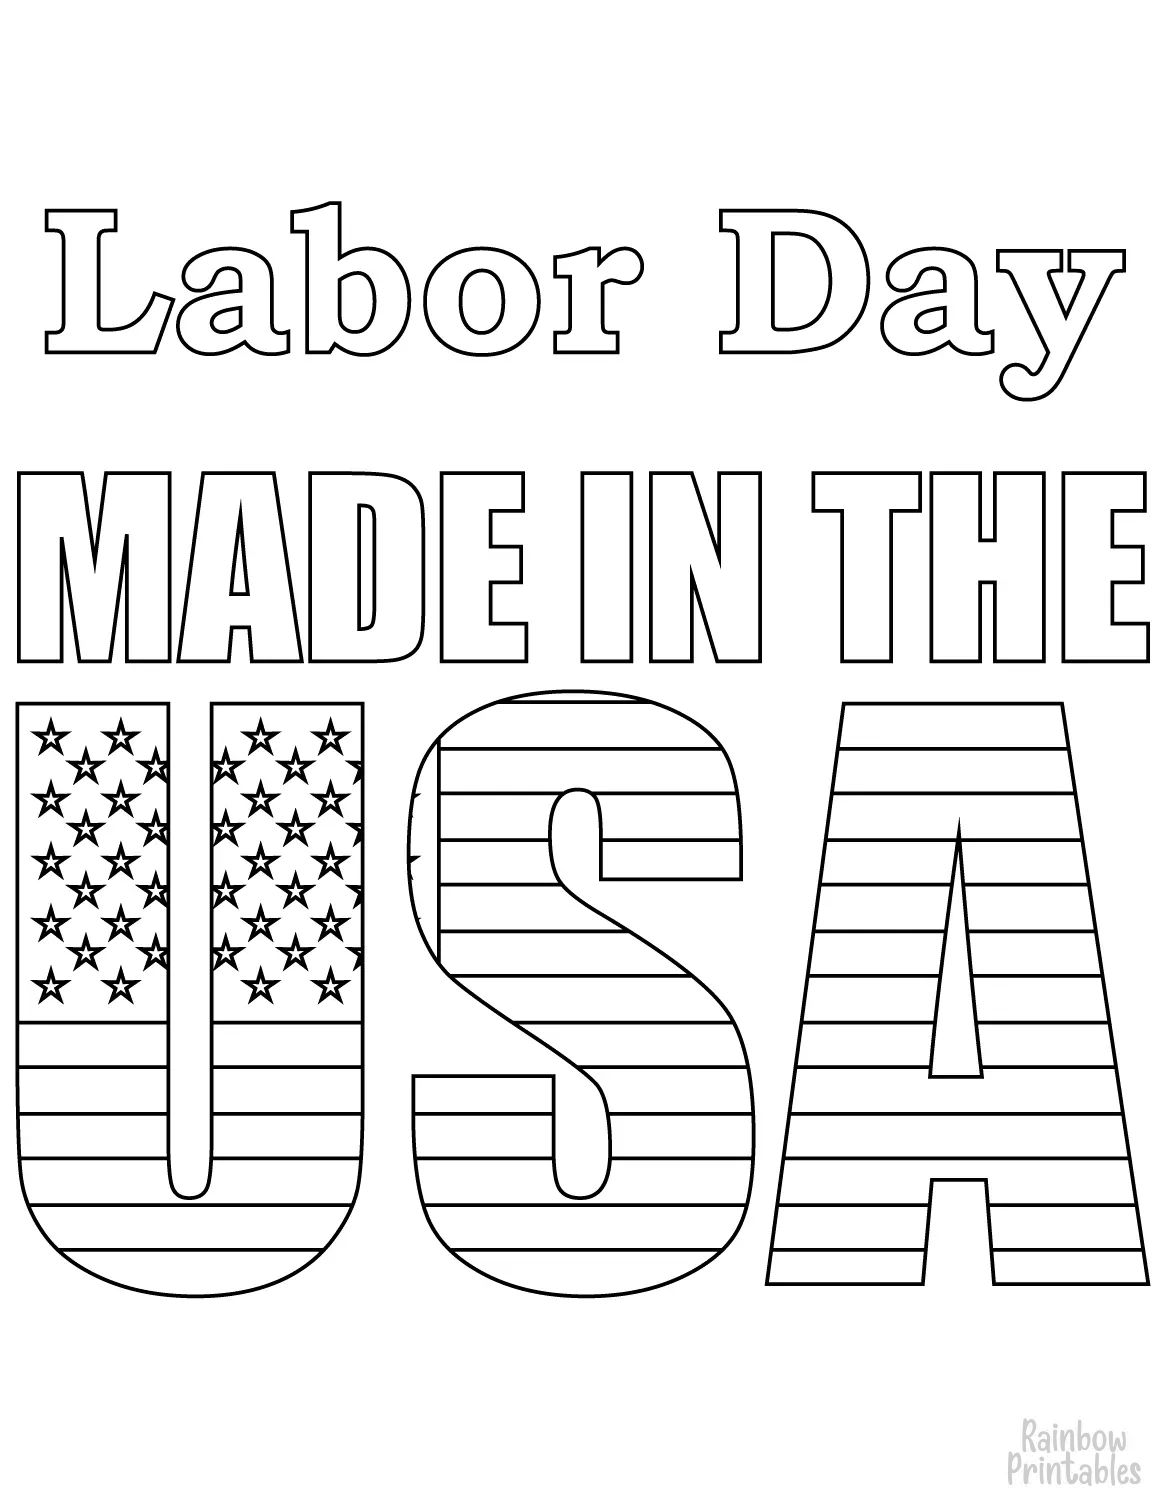 LABOR DAY Made in The USA Free Clipart INDEPENDENCE Public Domain Coloring Pages Line Art Drawings for Kids-